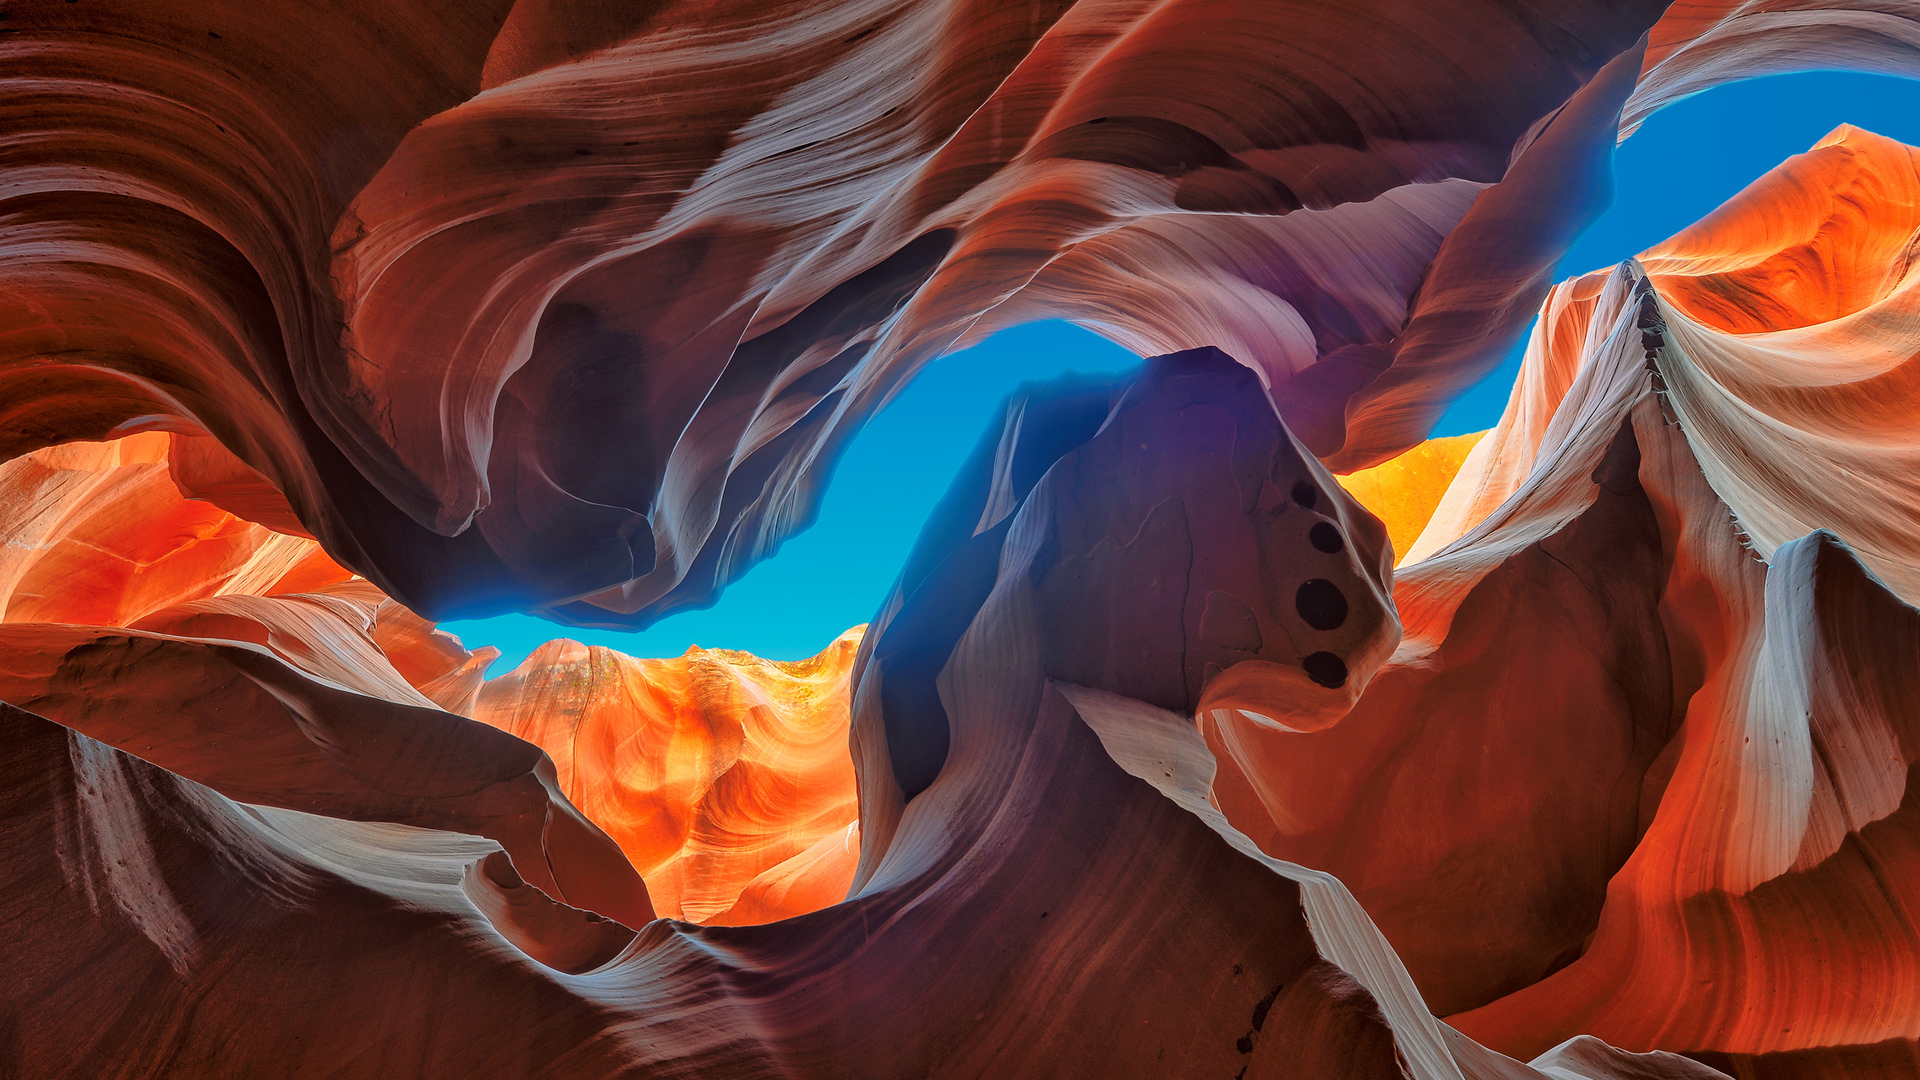 Wallpaper Antelope Canyon, cave, Gionee, stock